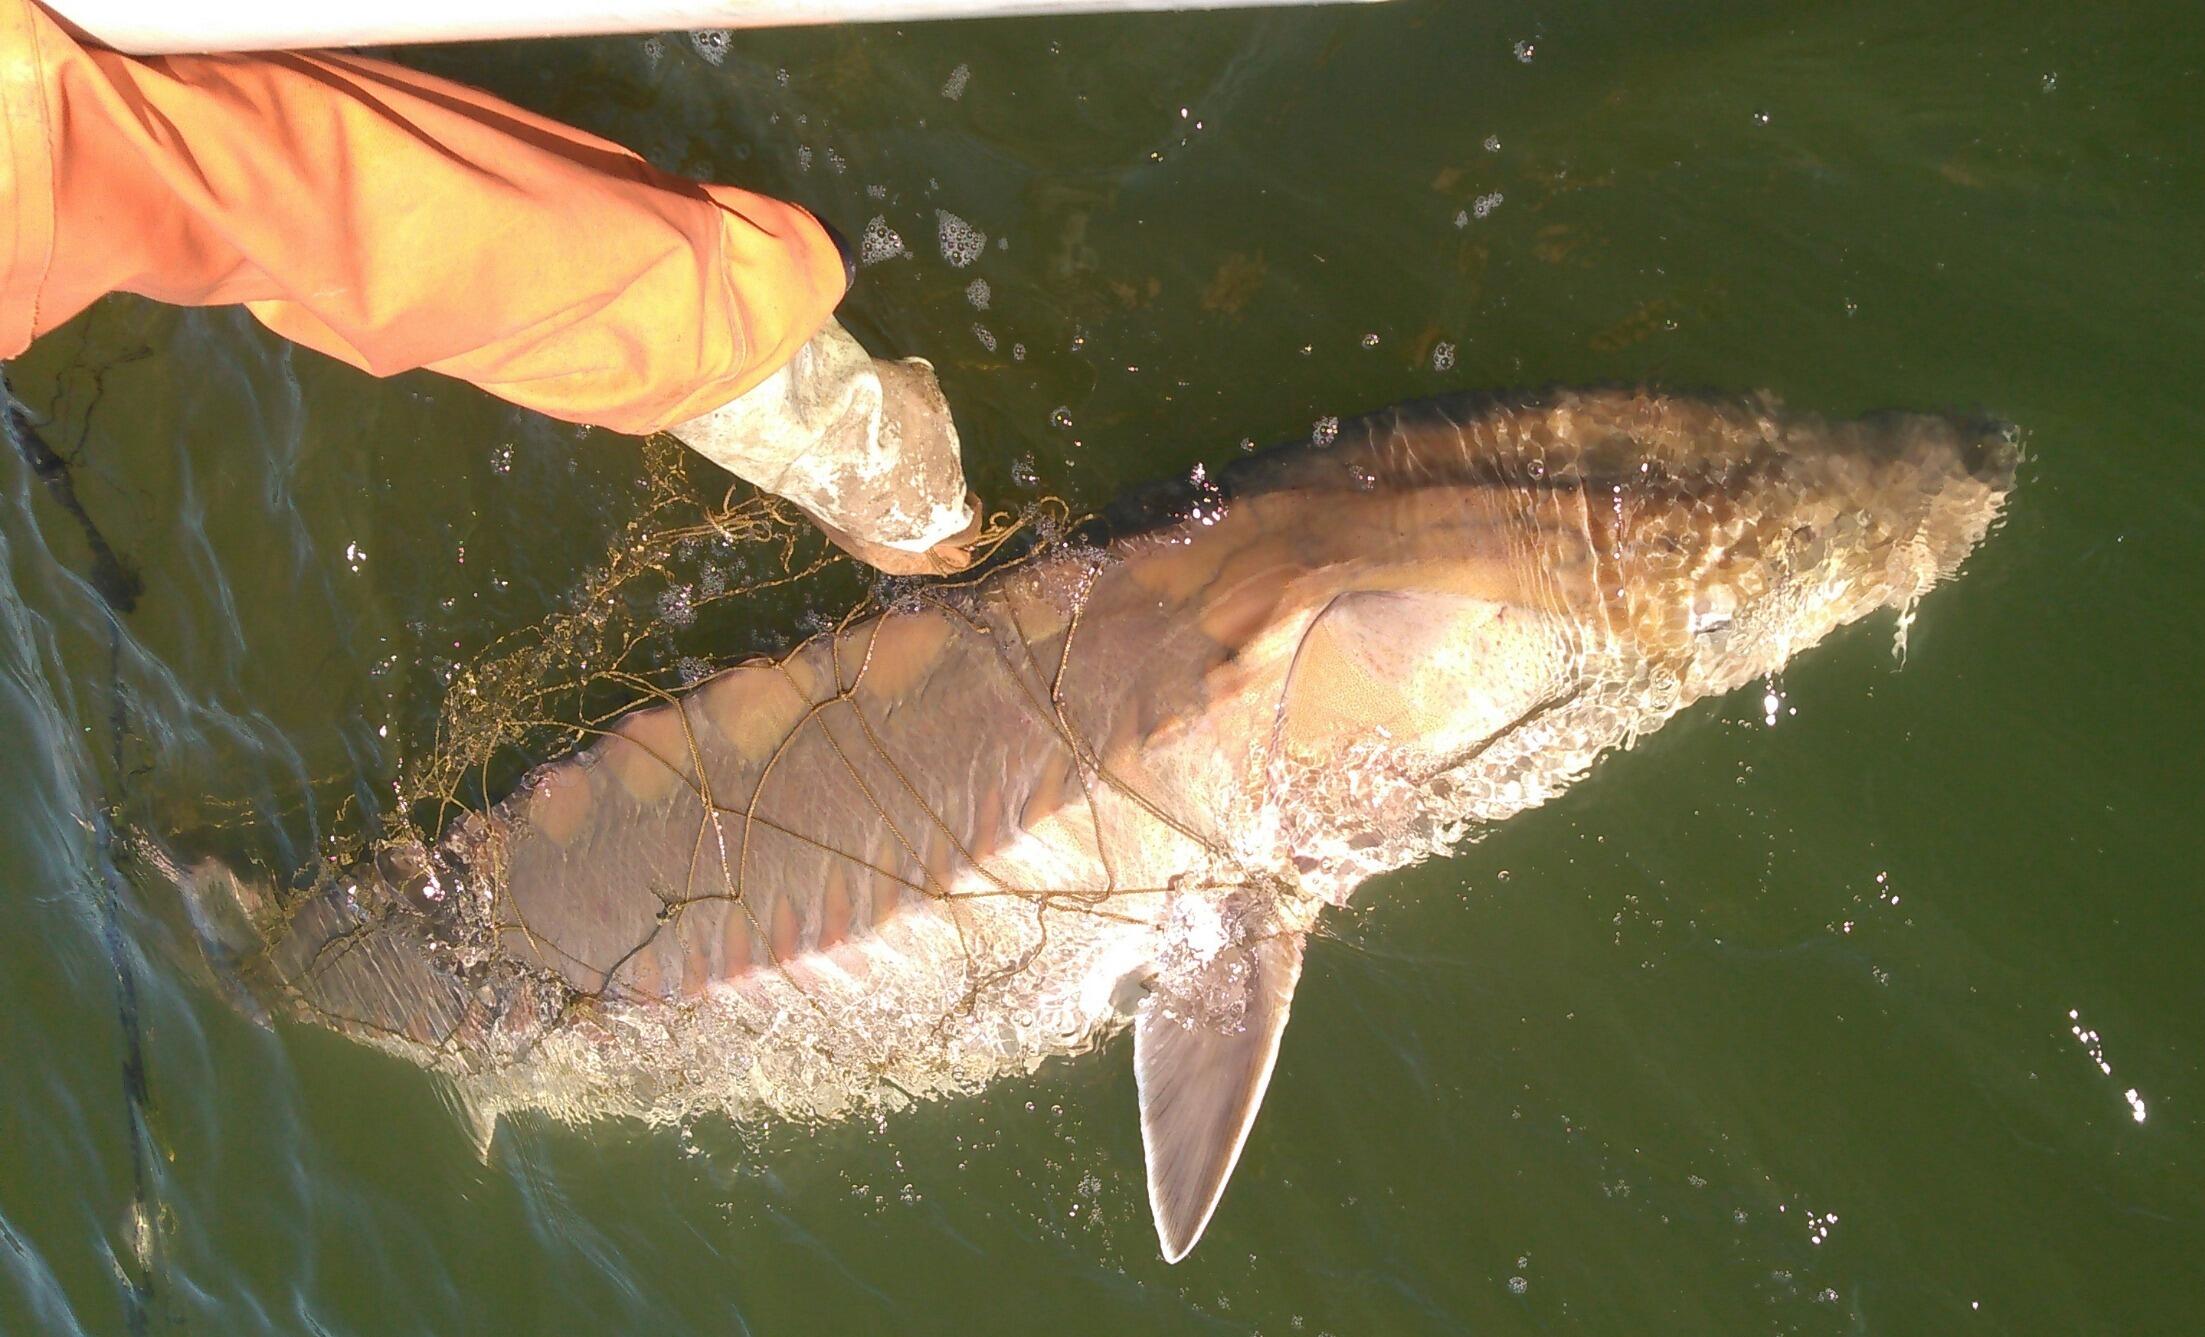 A sturgeon fish in the water